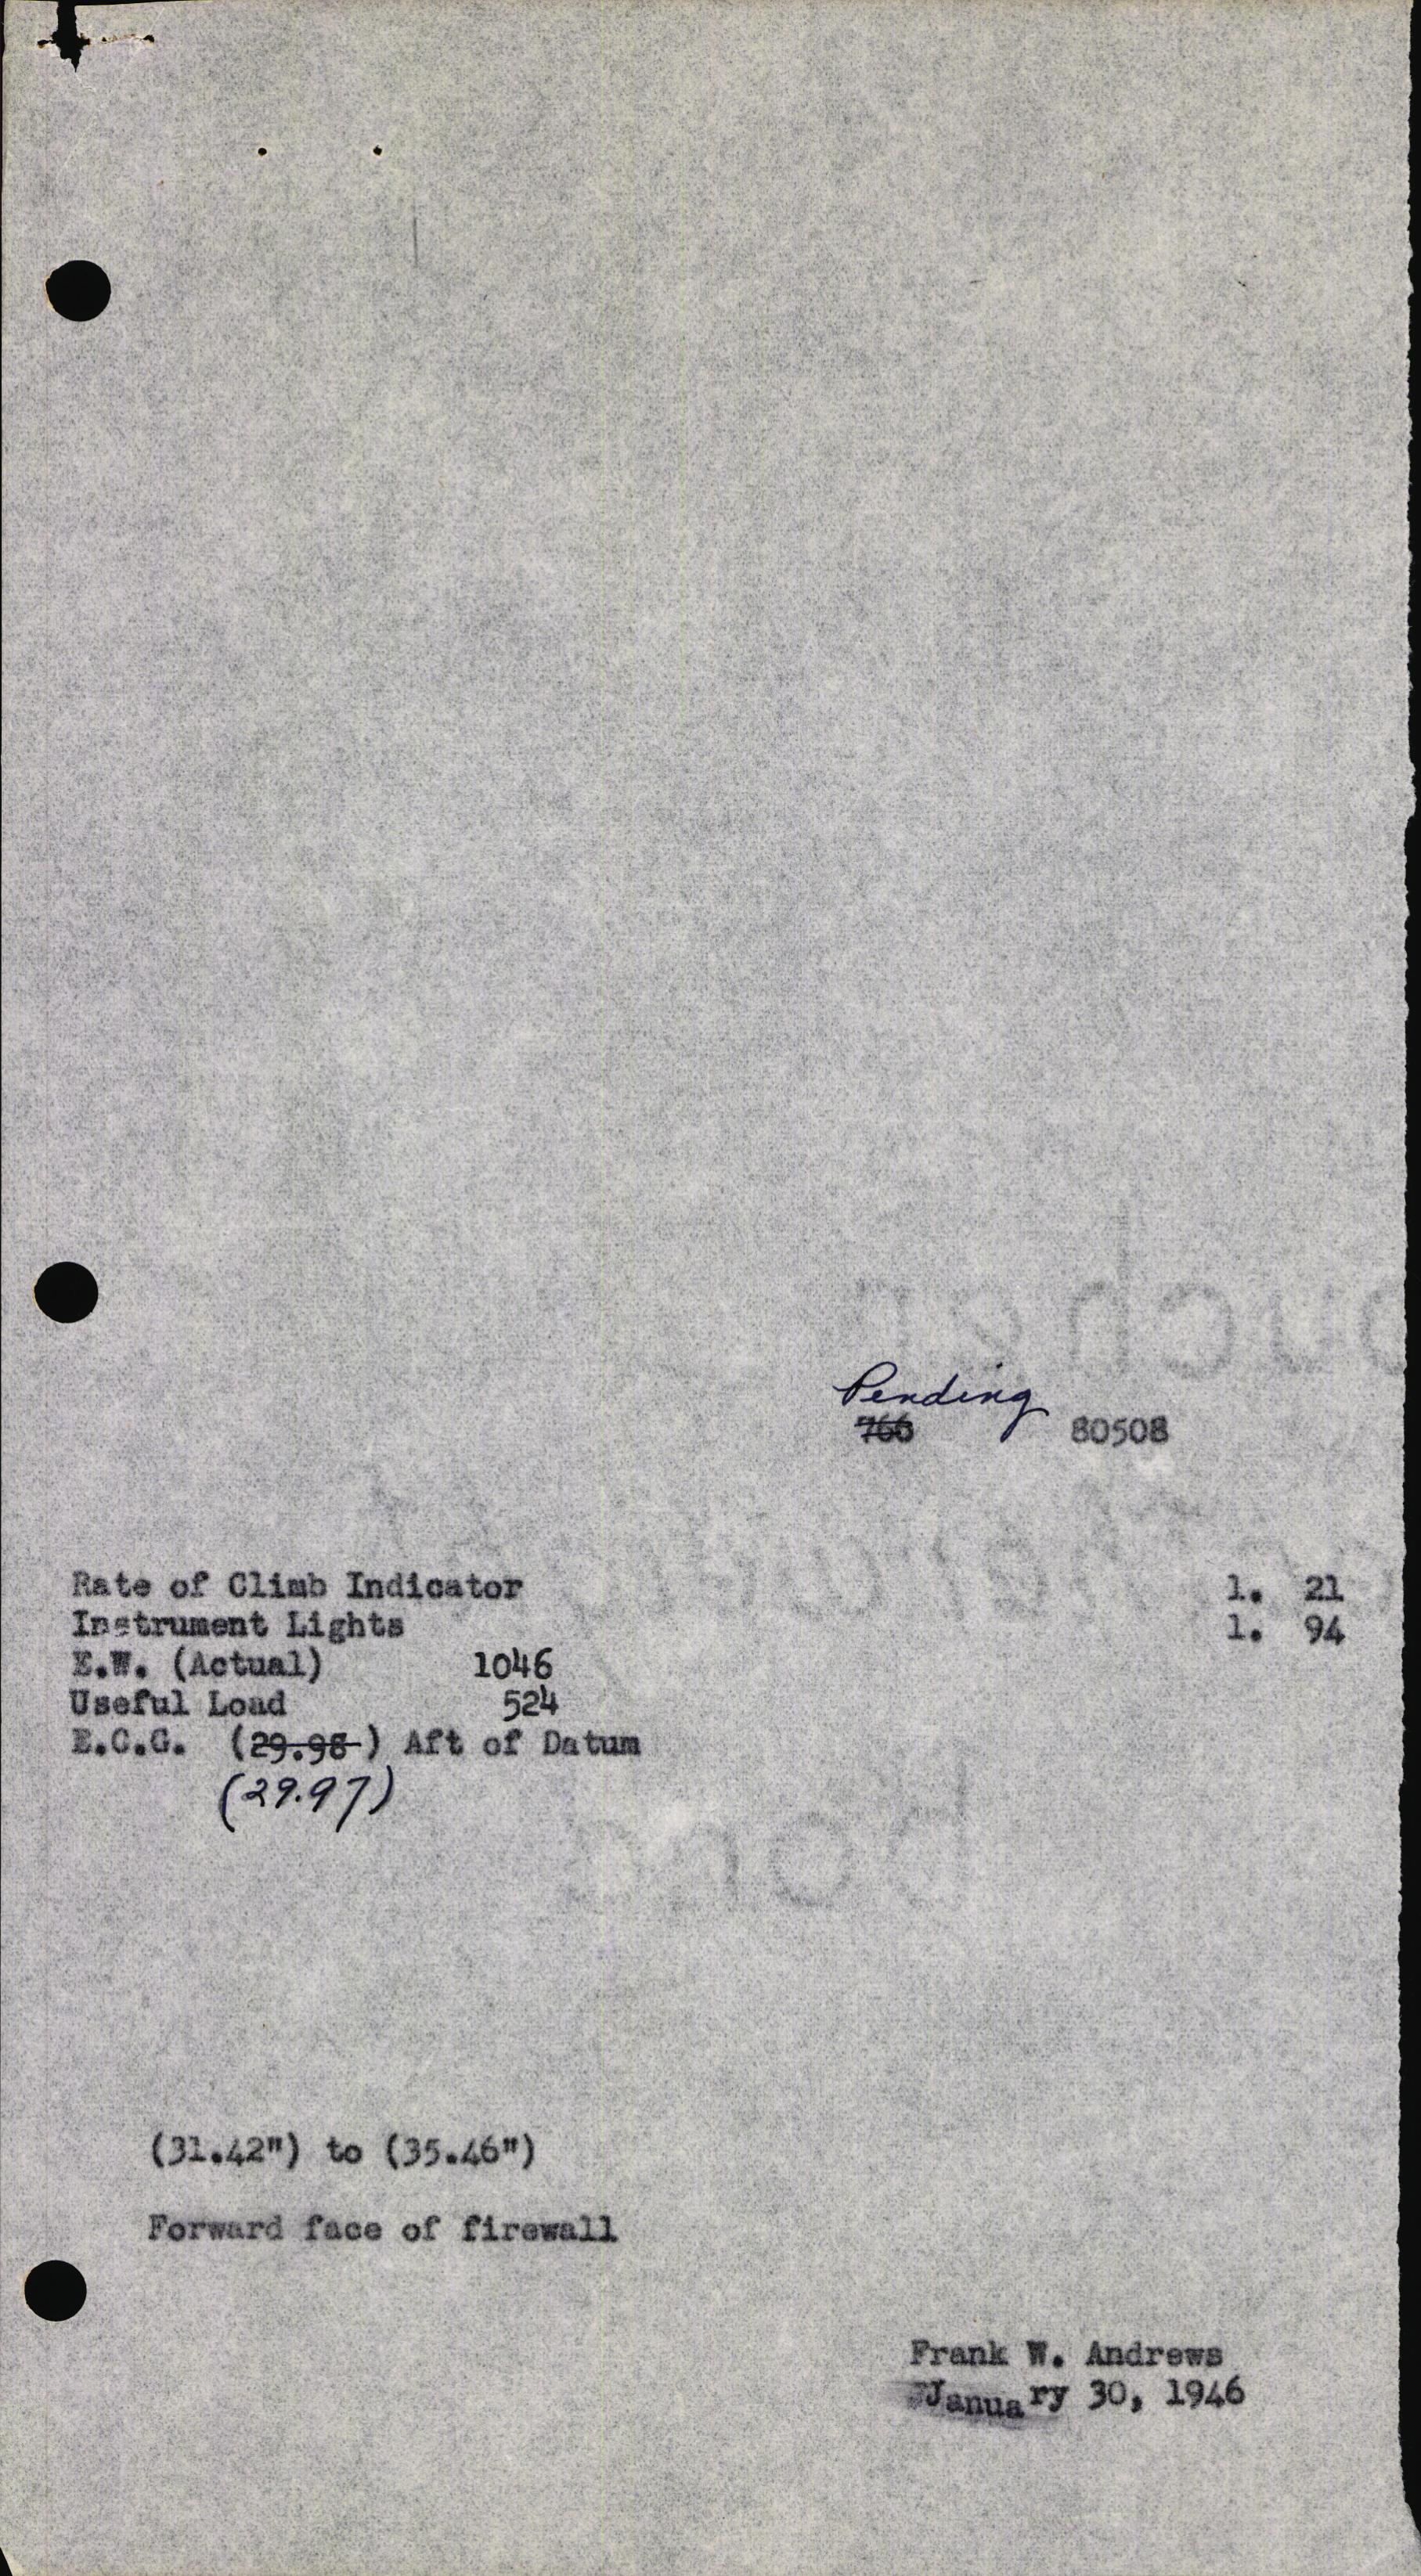 Sample page 3 from AirCorps Library document: Technical Information for Serial Number 11